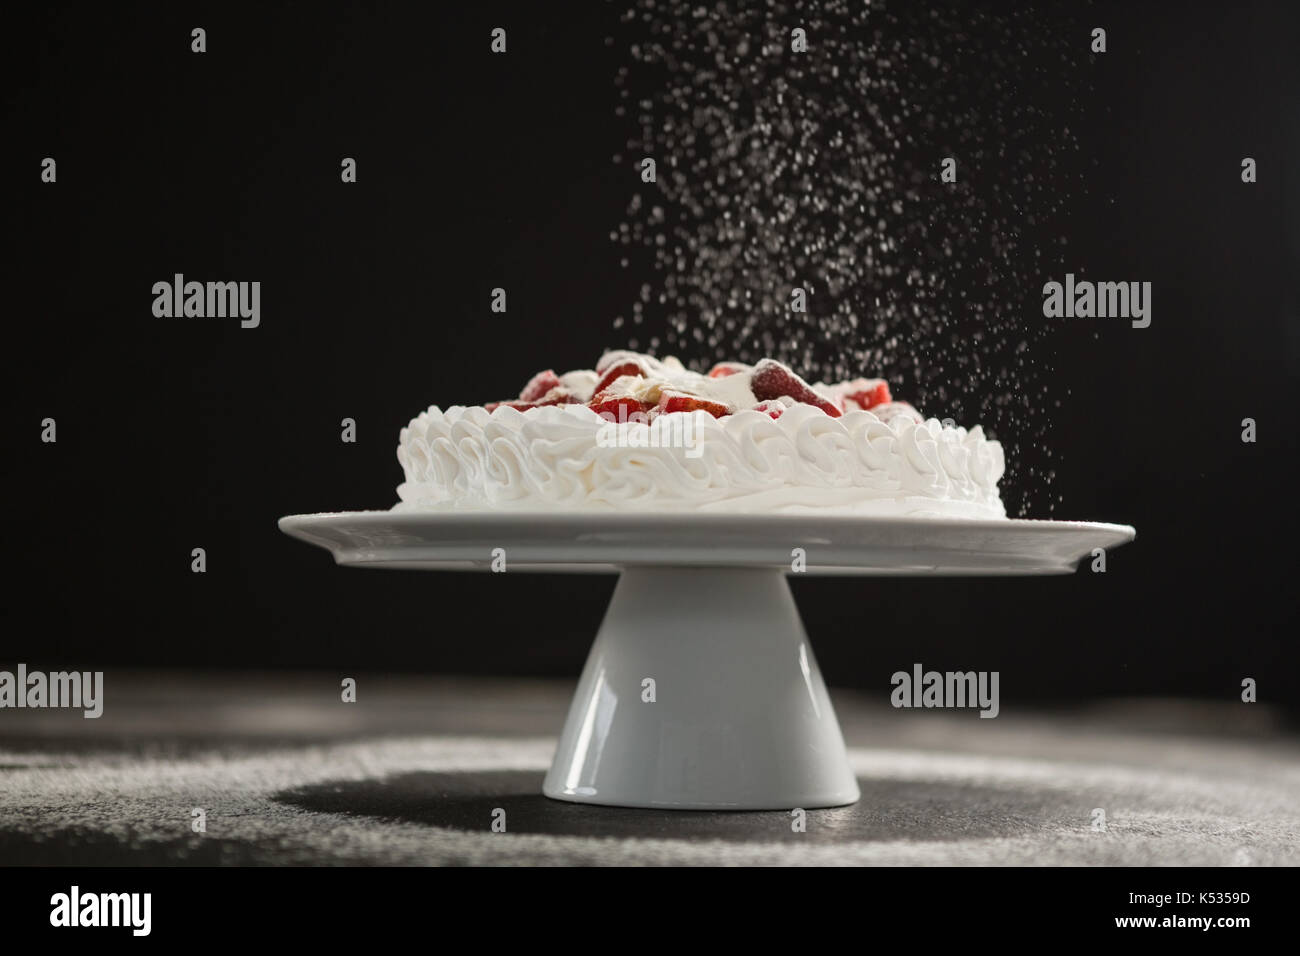 Powdered sugar falling over white cake on stand against black background Stock Photo